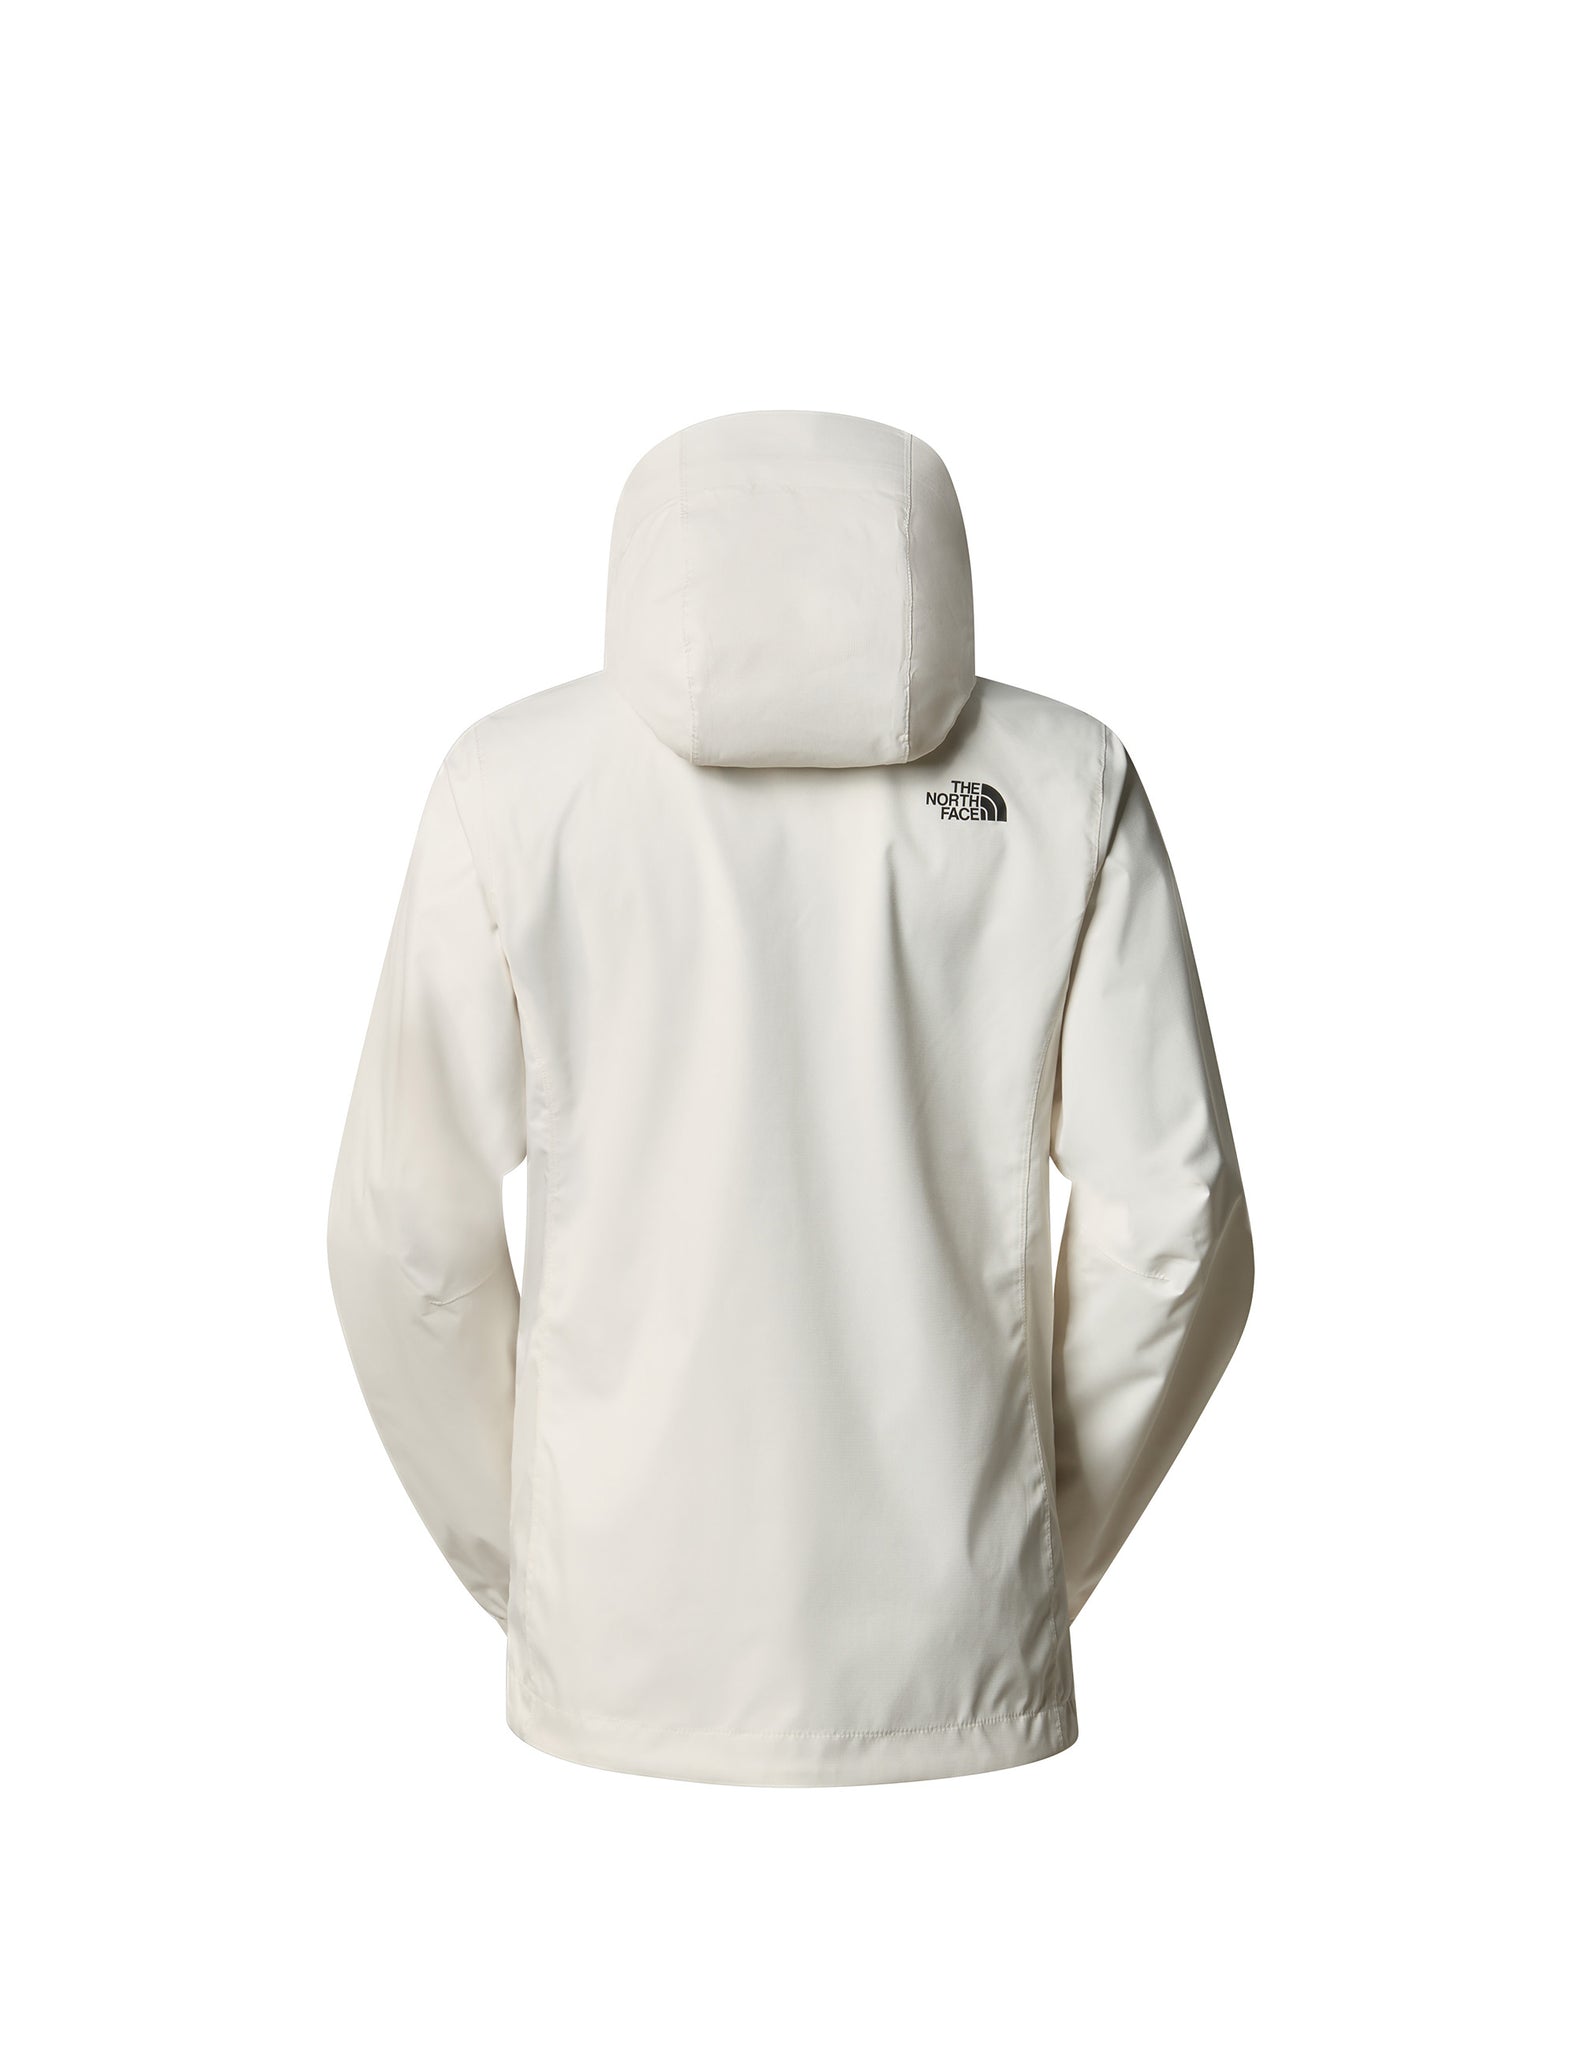 The North Face Women'S Quest Jacket Bianco Donna